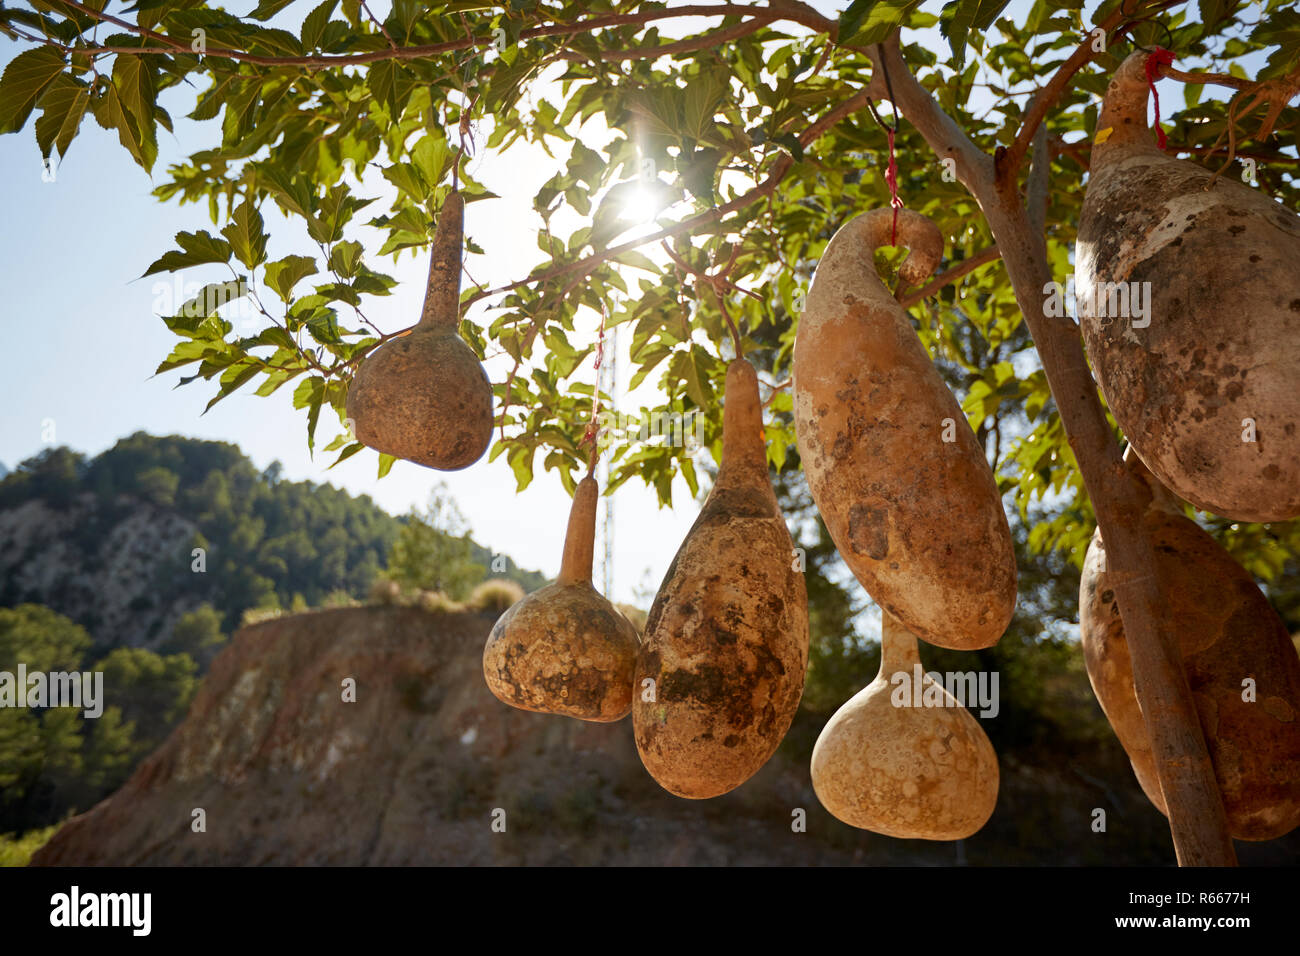 Oddly shaped calabash gourds hanging from the tree in the sun, Spain 2017 Stock Photo